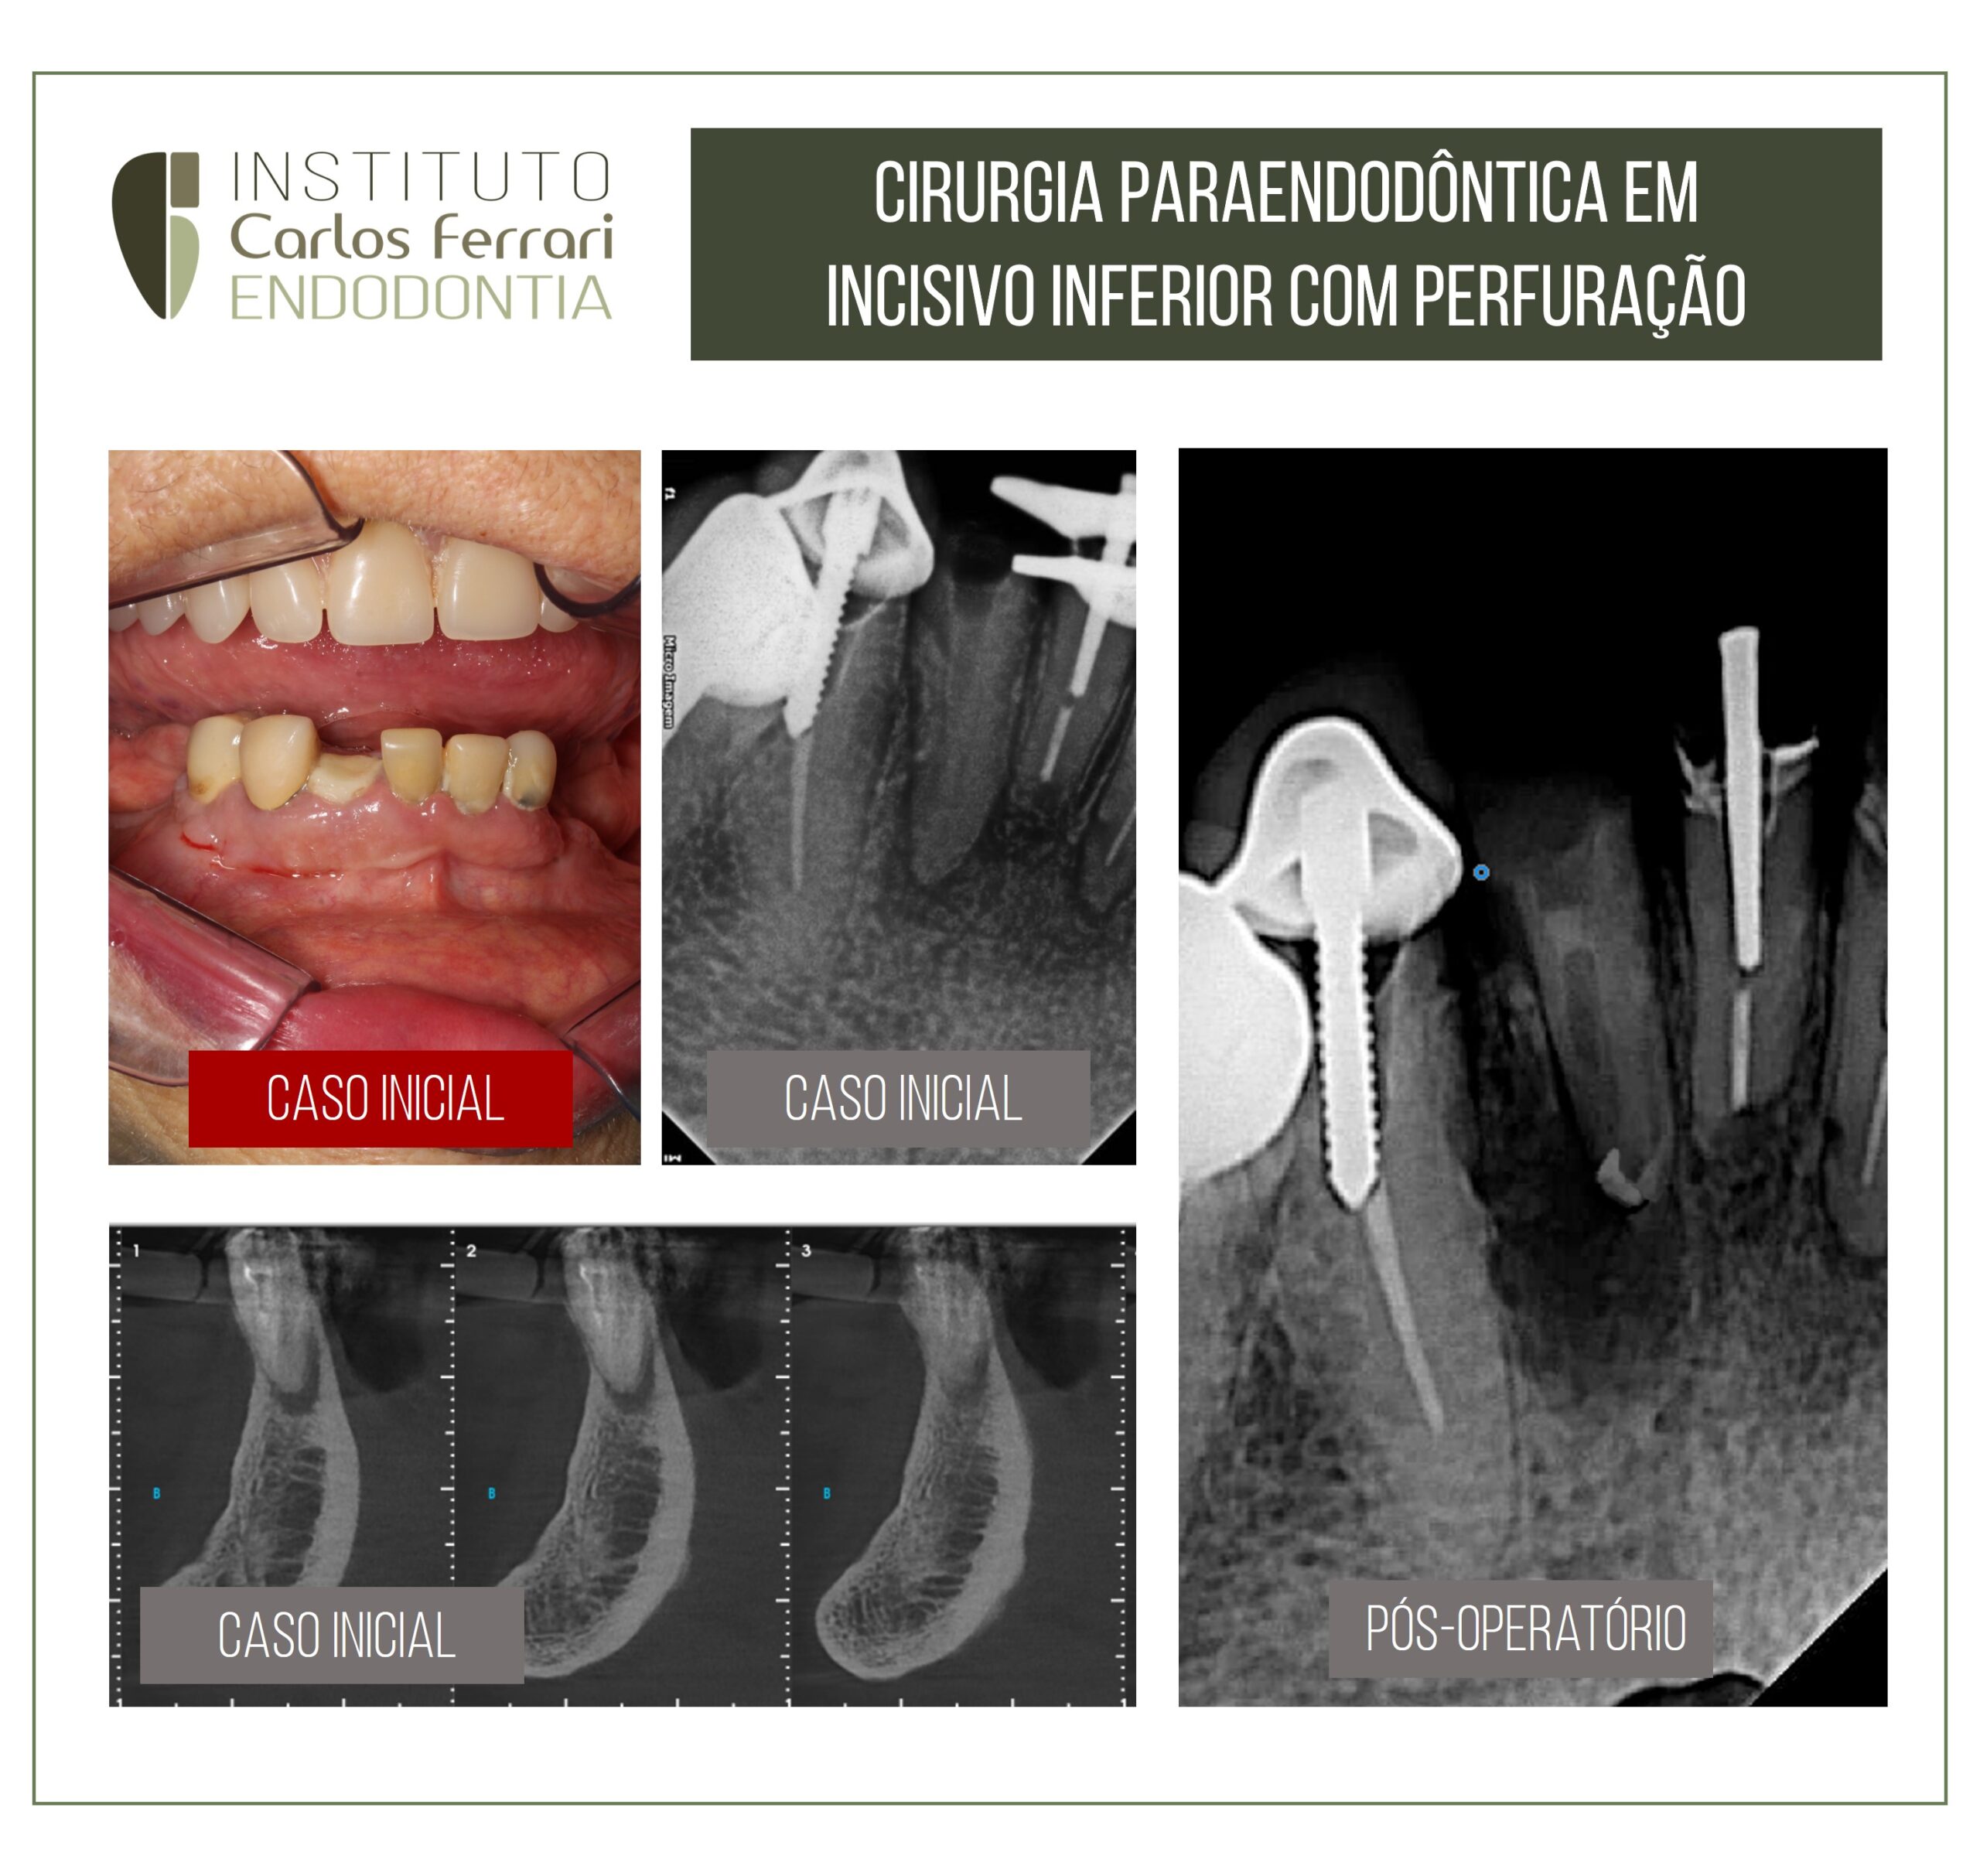 You are currently viewing Endodontic surgery of the lower incisor with perforation.